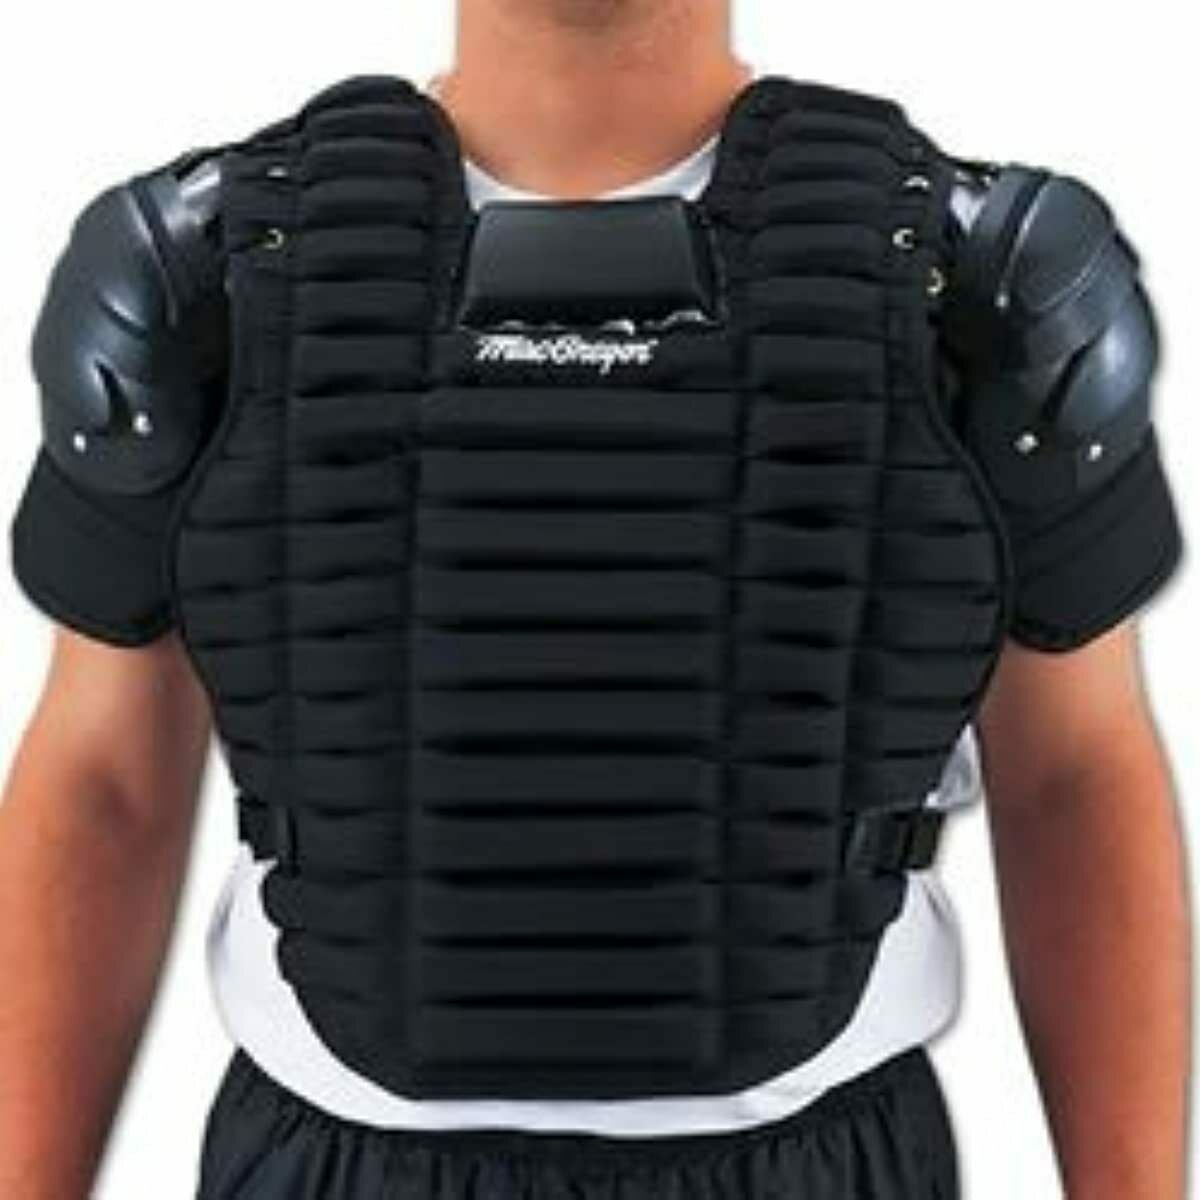 Umpire's Inside Chest Protector (ea)